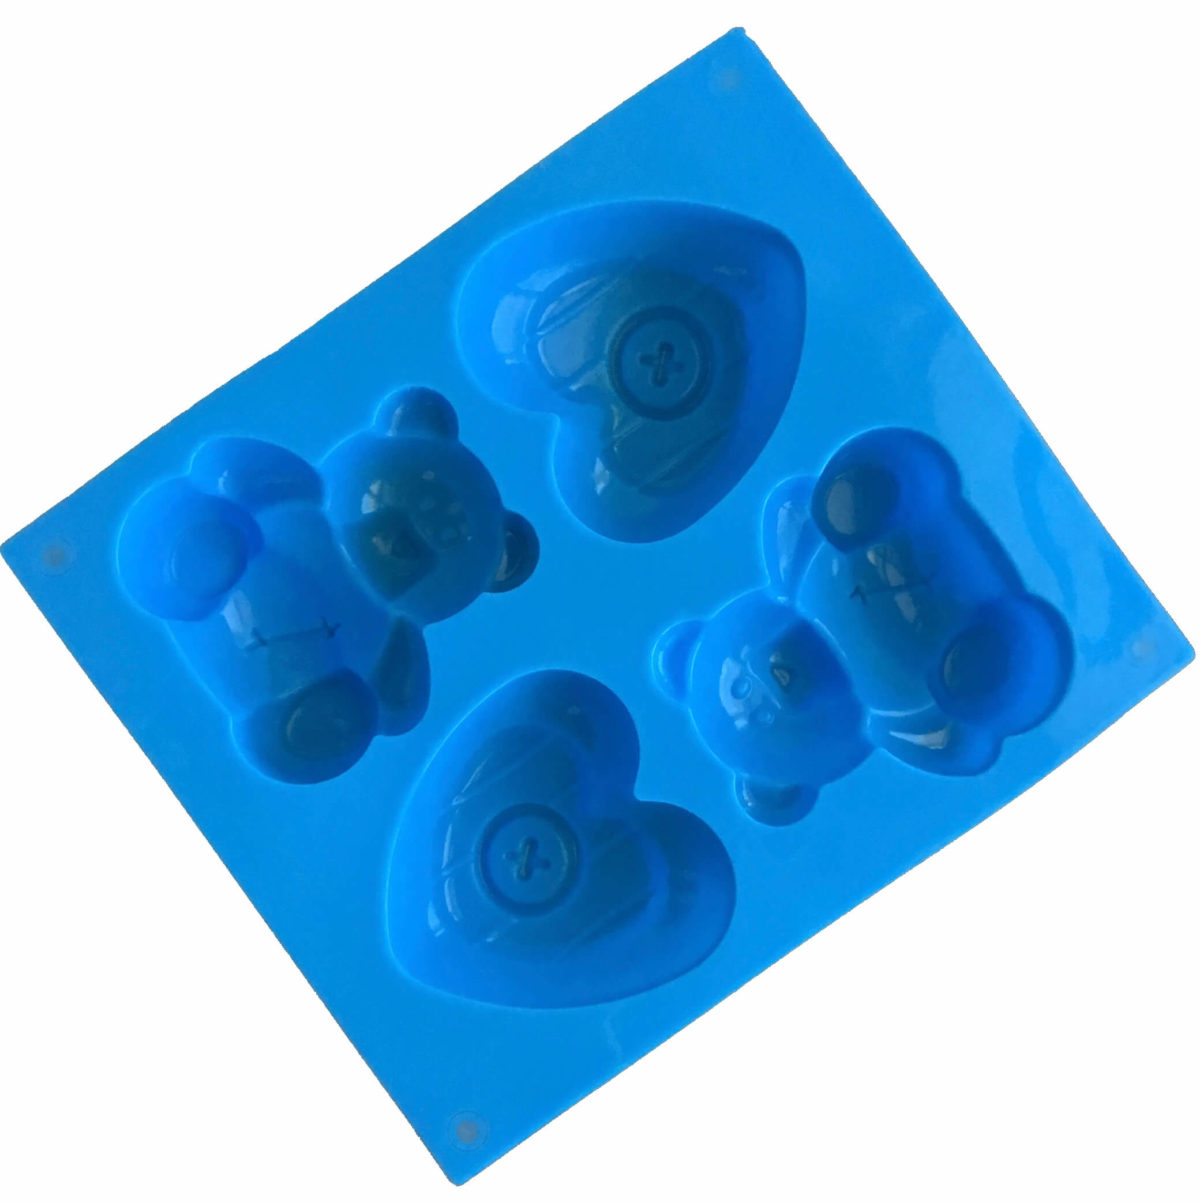 back of large blue silicone mould with four cavites - two each of toy teddy bear and a heart with a button in the middle